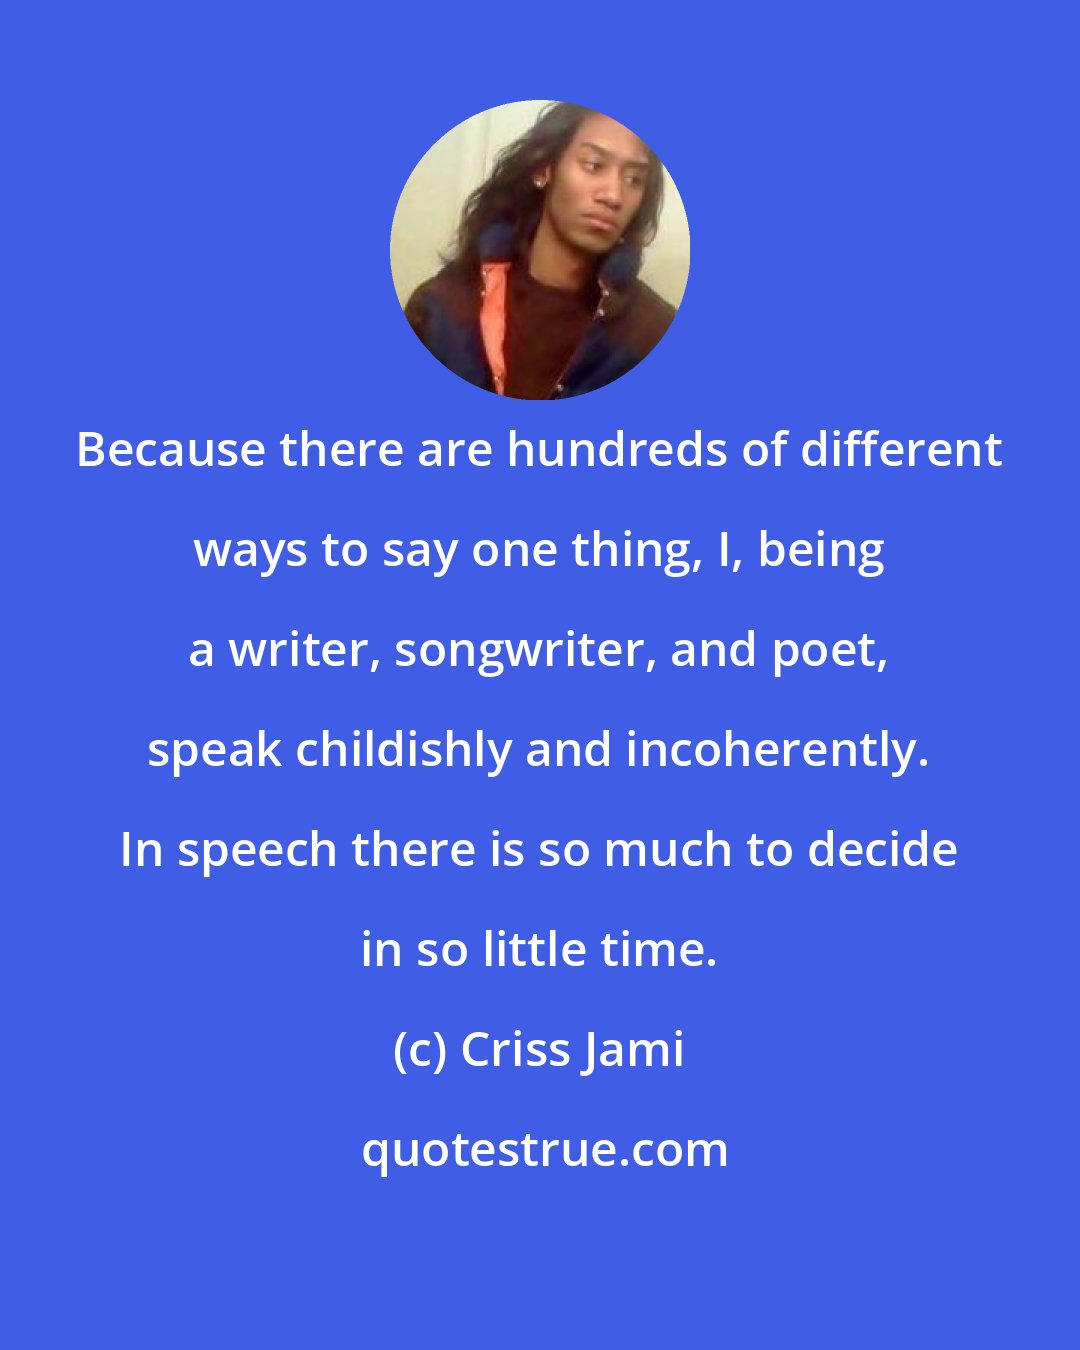 Criss Jami: Because there are hundreds of different ways to say one thing, I, being a writer, songwriter, and poet, speak childishly and incoherently. In speech there is so much to decide in so little time.